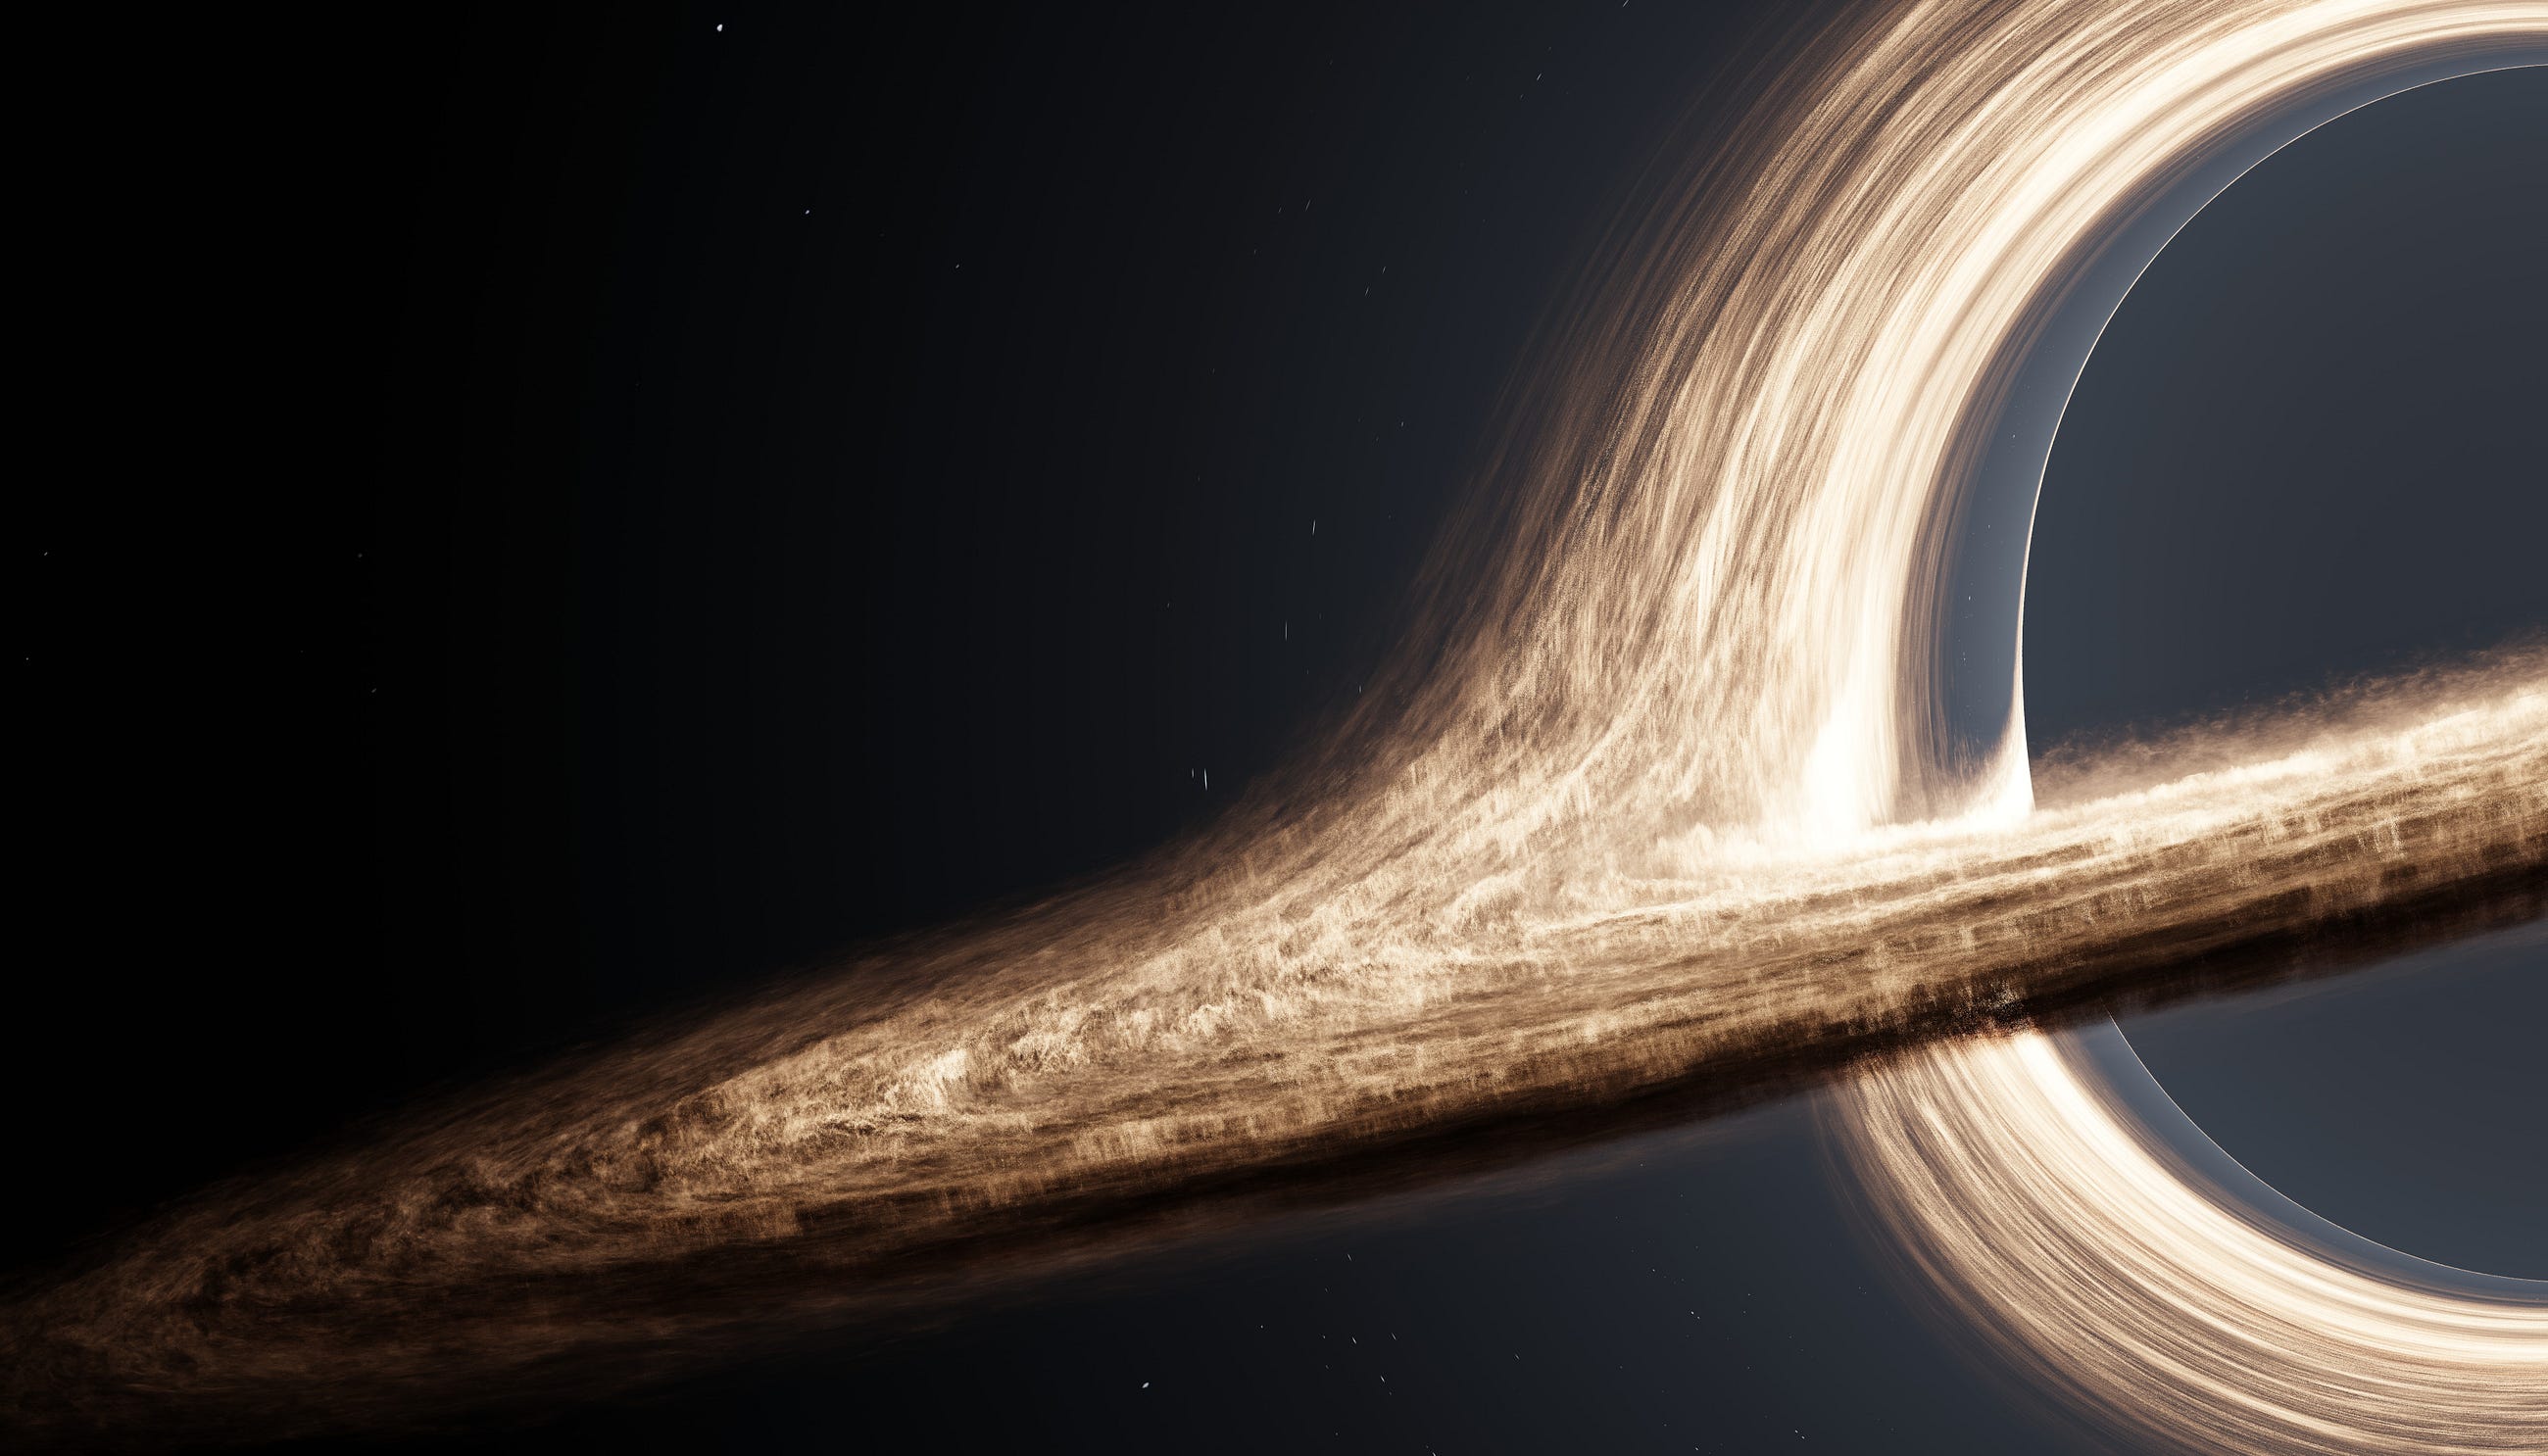 Is it possible for something to escape out of a black hole-